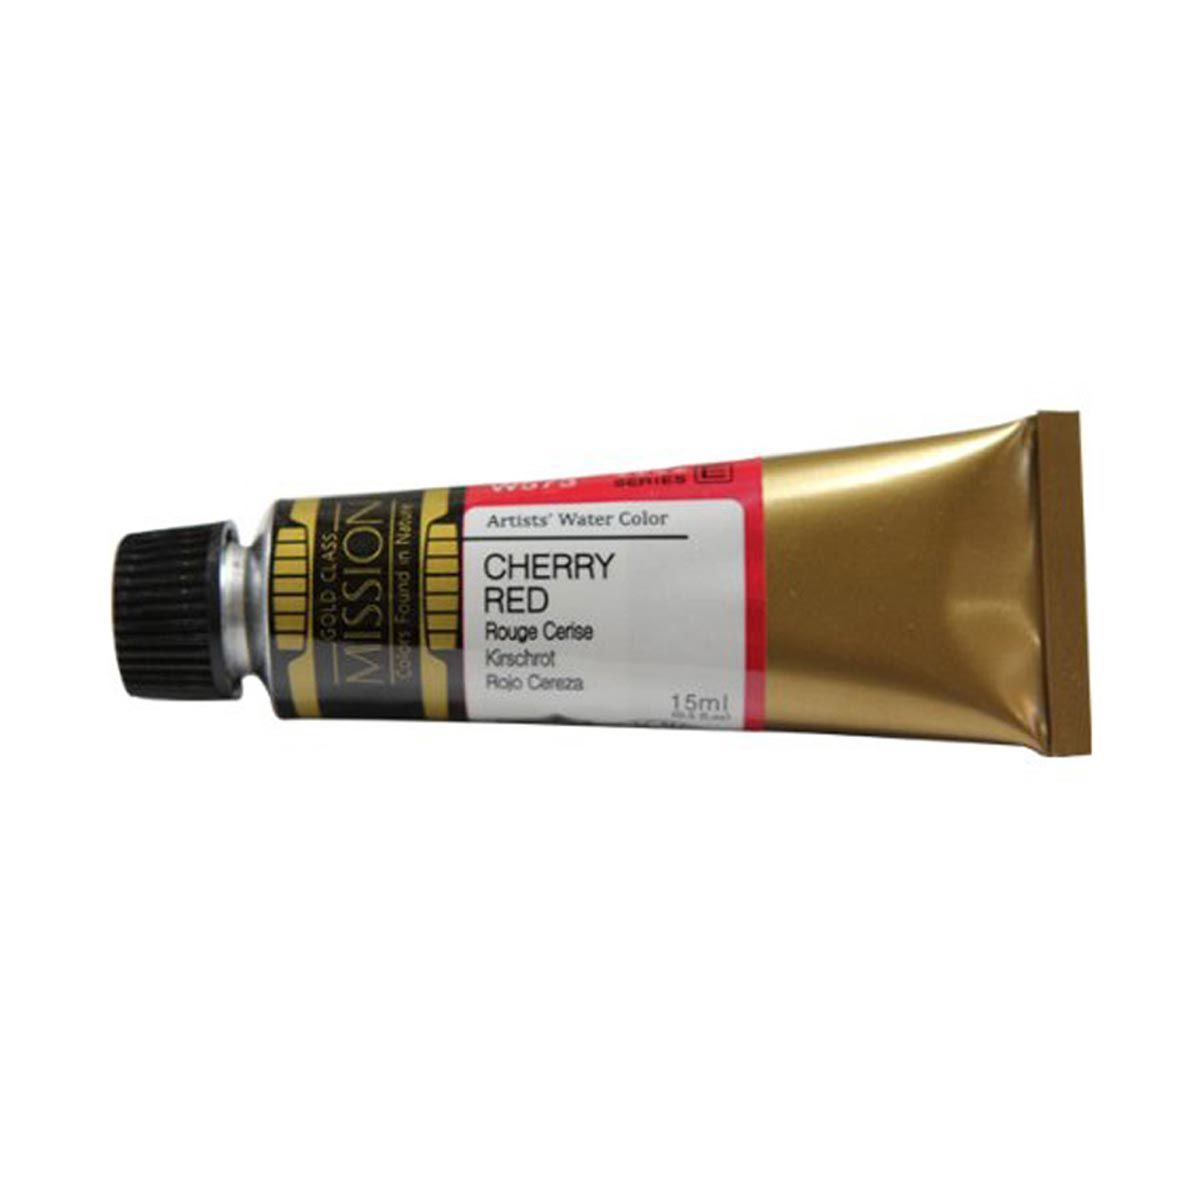 Mission Gold Watercolour Cherry Red 15ml